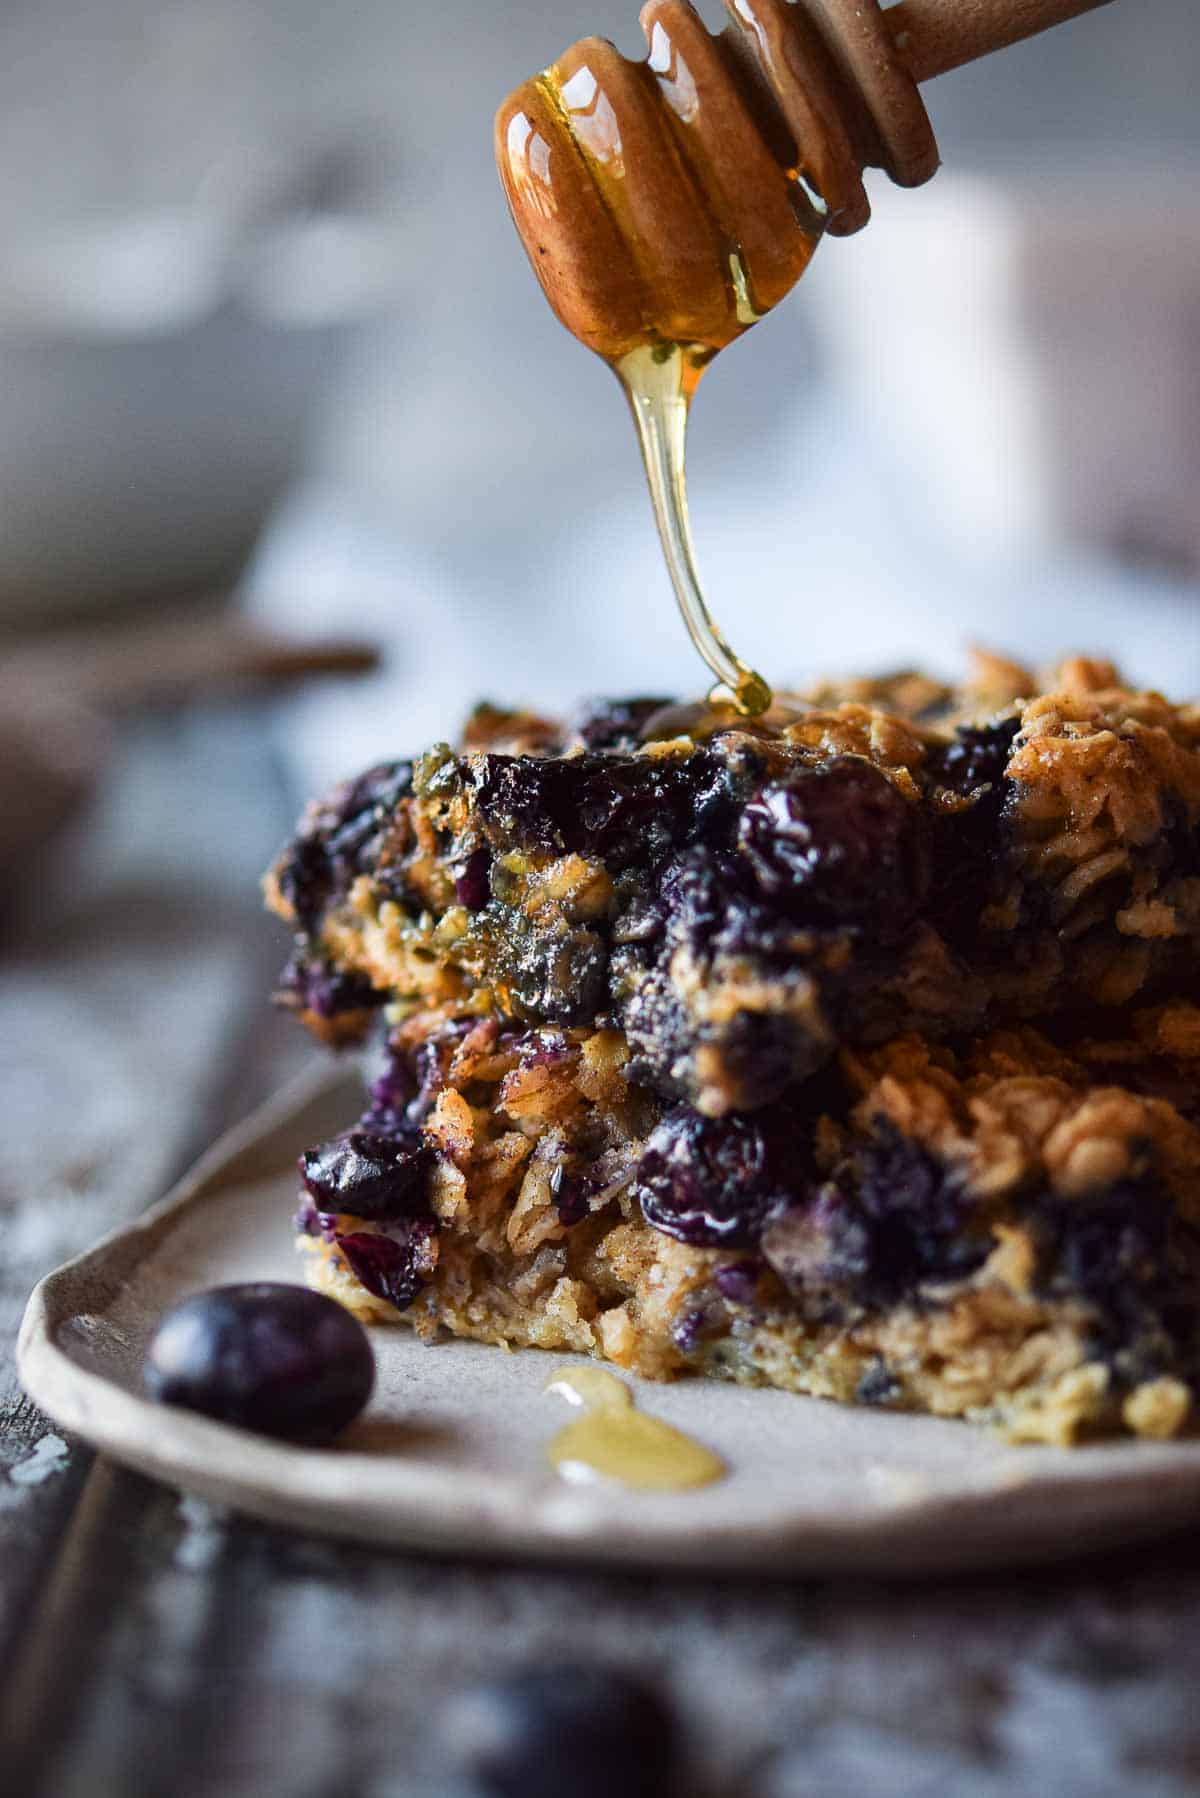 Honey is drizzled over a slice of blueberry-baked oatmeal.